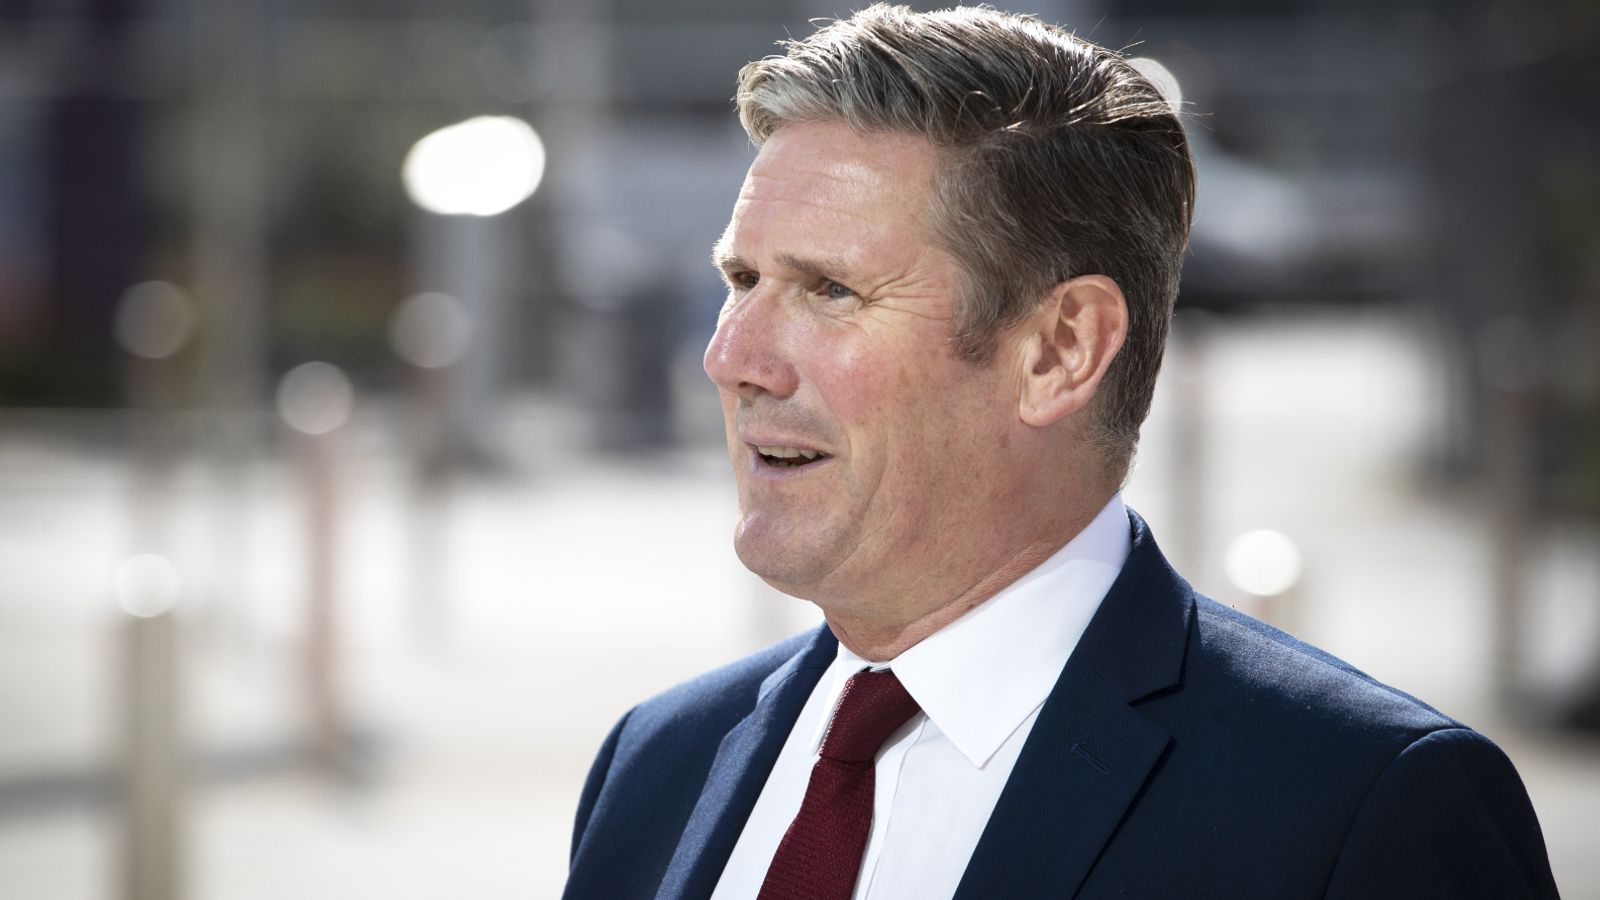 Keir Starmer has triggered a civil war with the left | Politics News ...